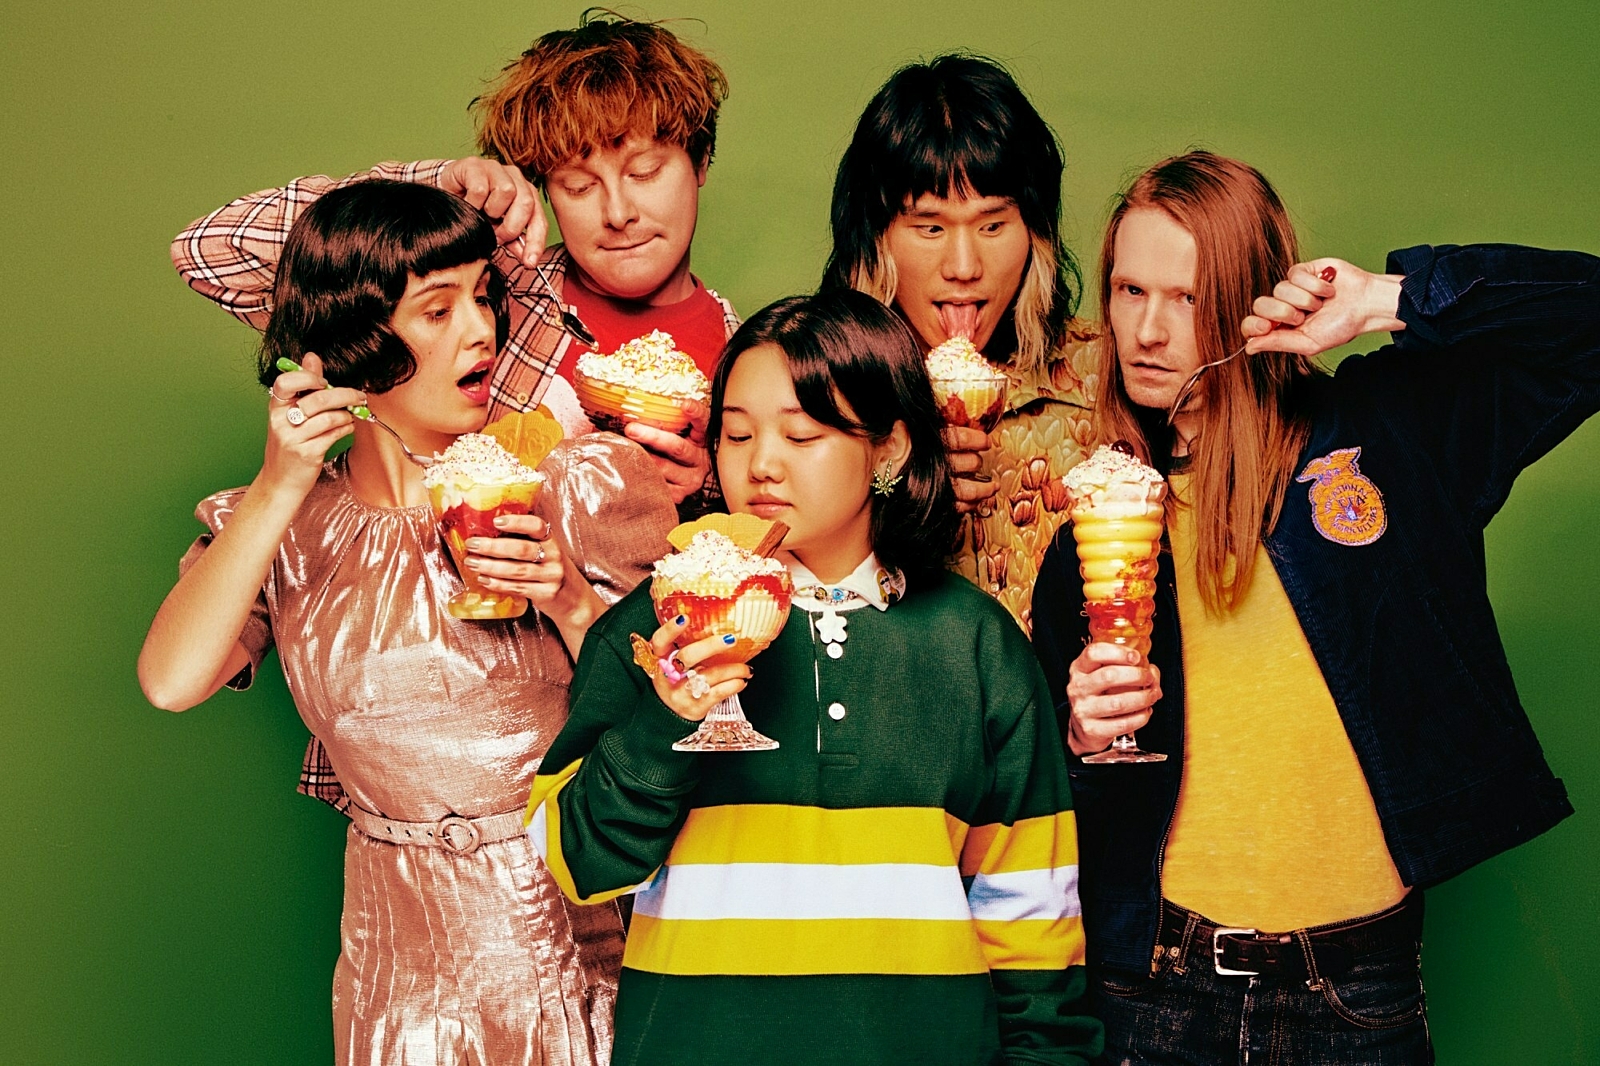 Superorganism share new video for 'Solar System'